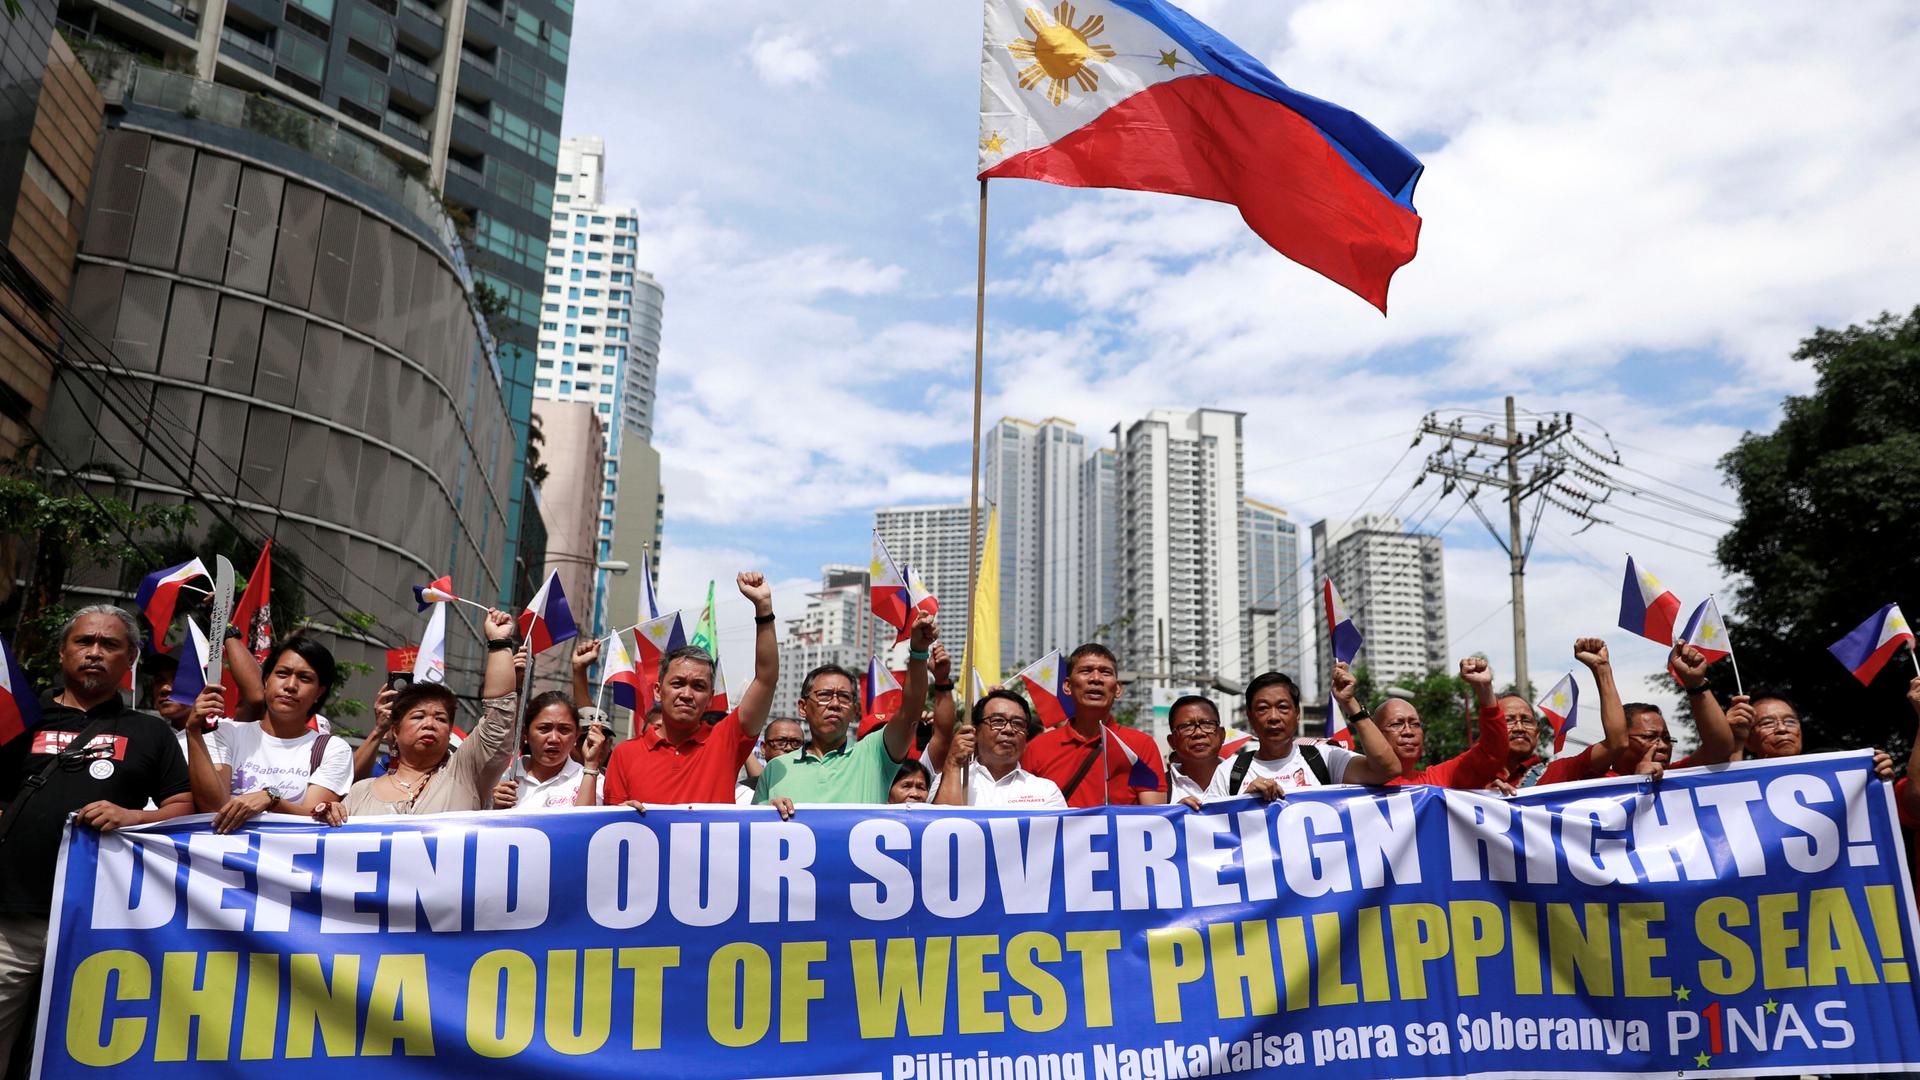 protesters carry blue and red signs saying 'defend our sovereignty'